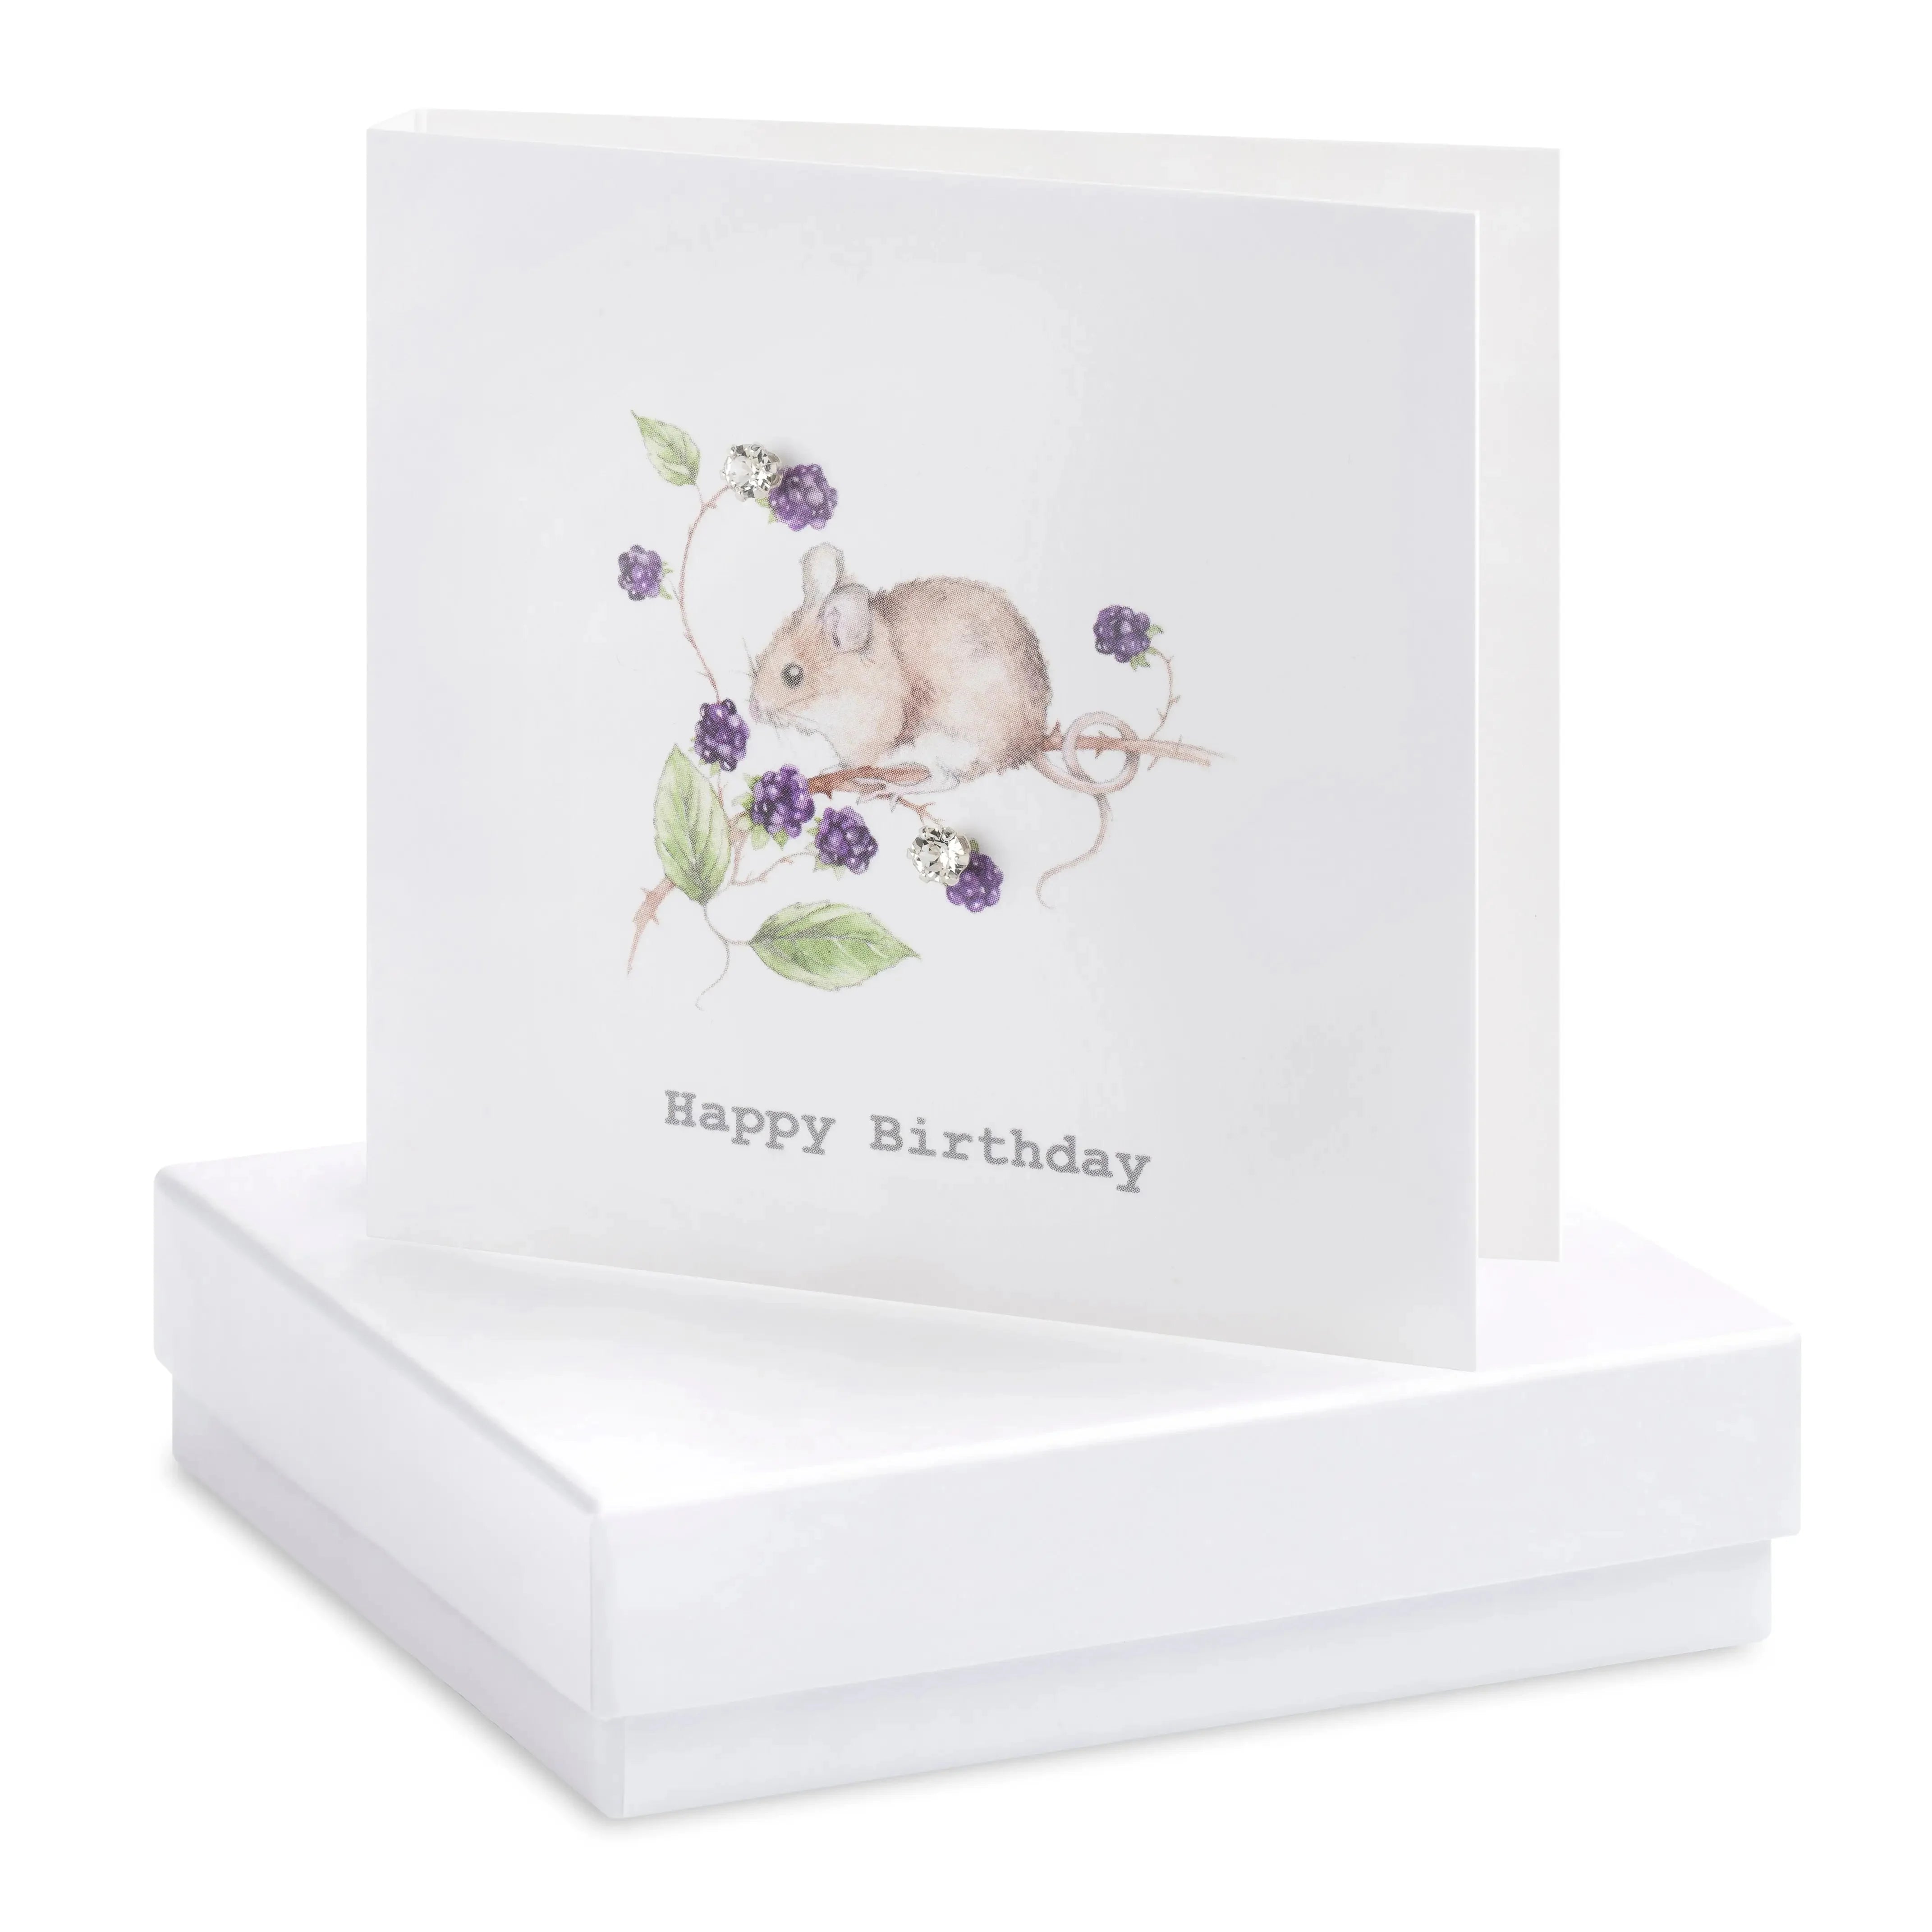 Fabulous Gifts Crumble & Core Box BlackBerry Birthday Mouse Earring Card by Weirs of Baggot Street